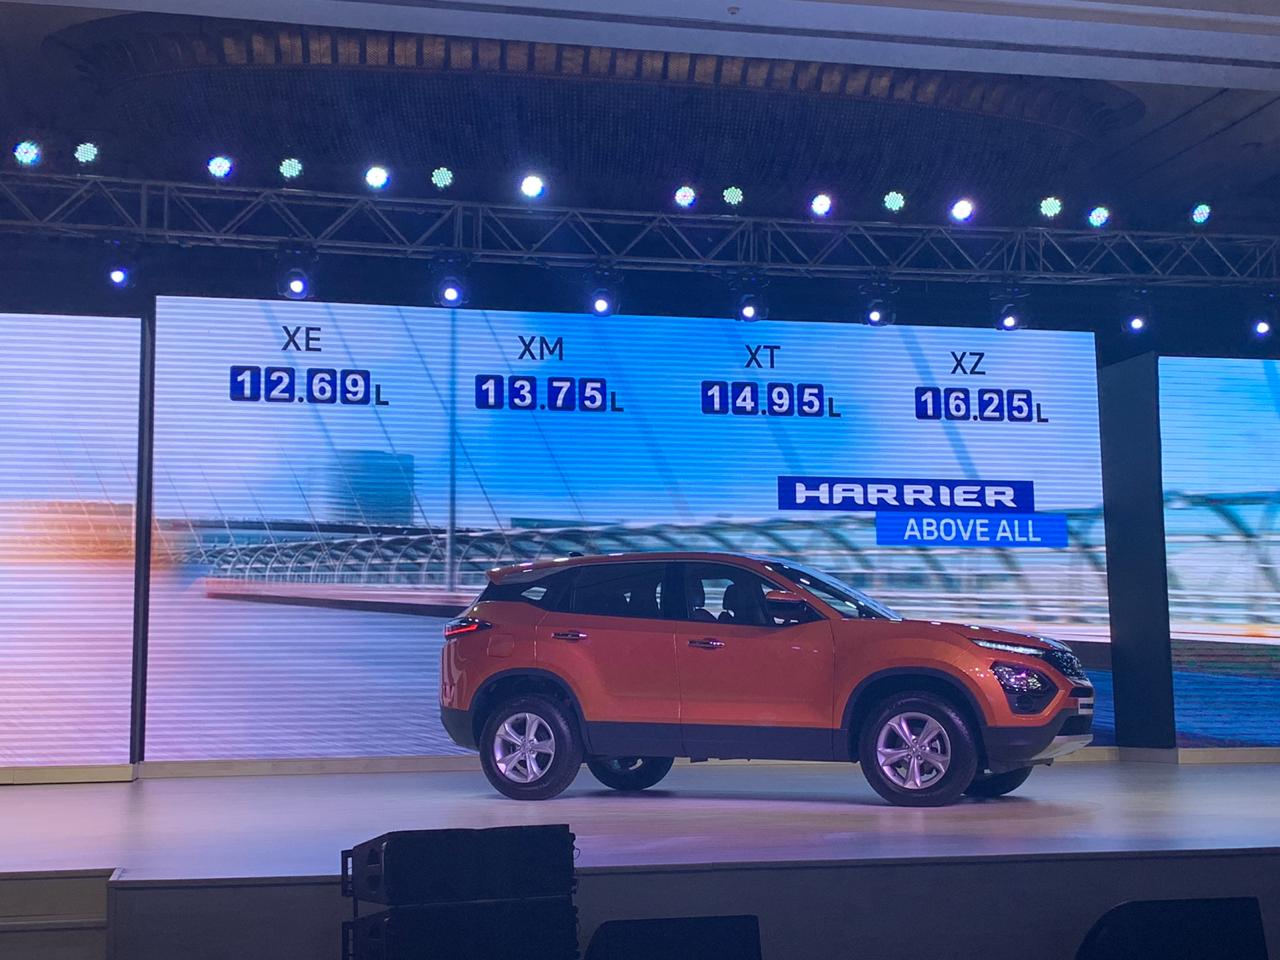 <p>Prices are out! The Tata Harrier has been launched at prices starting at Rs 12.69 lakh, going up to Rs 16.25 lakh, ex-showroom.</p>